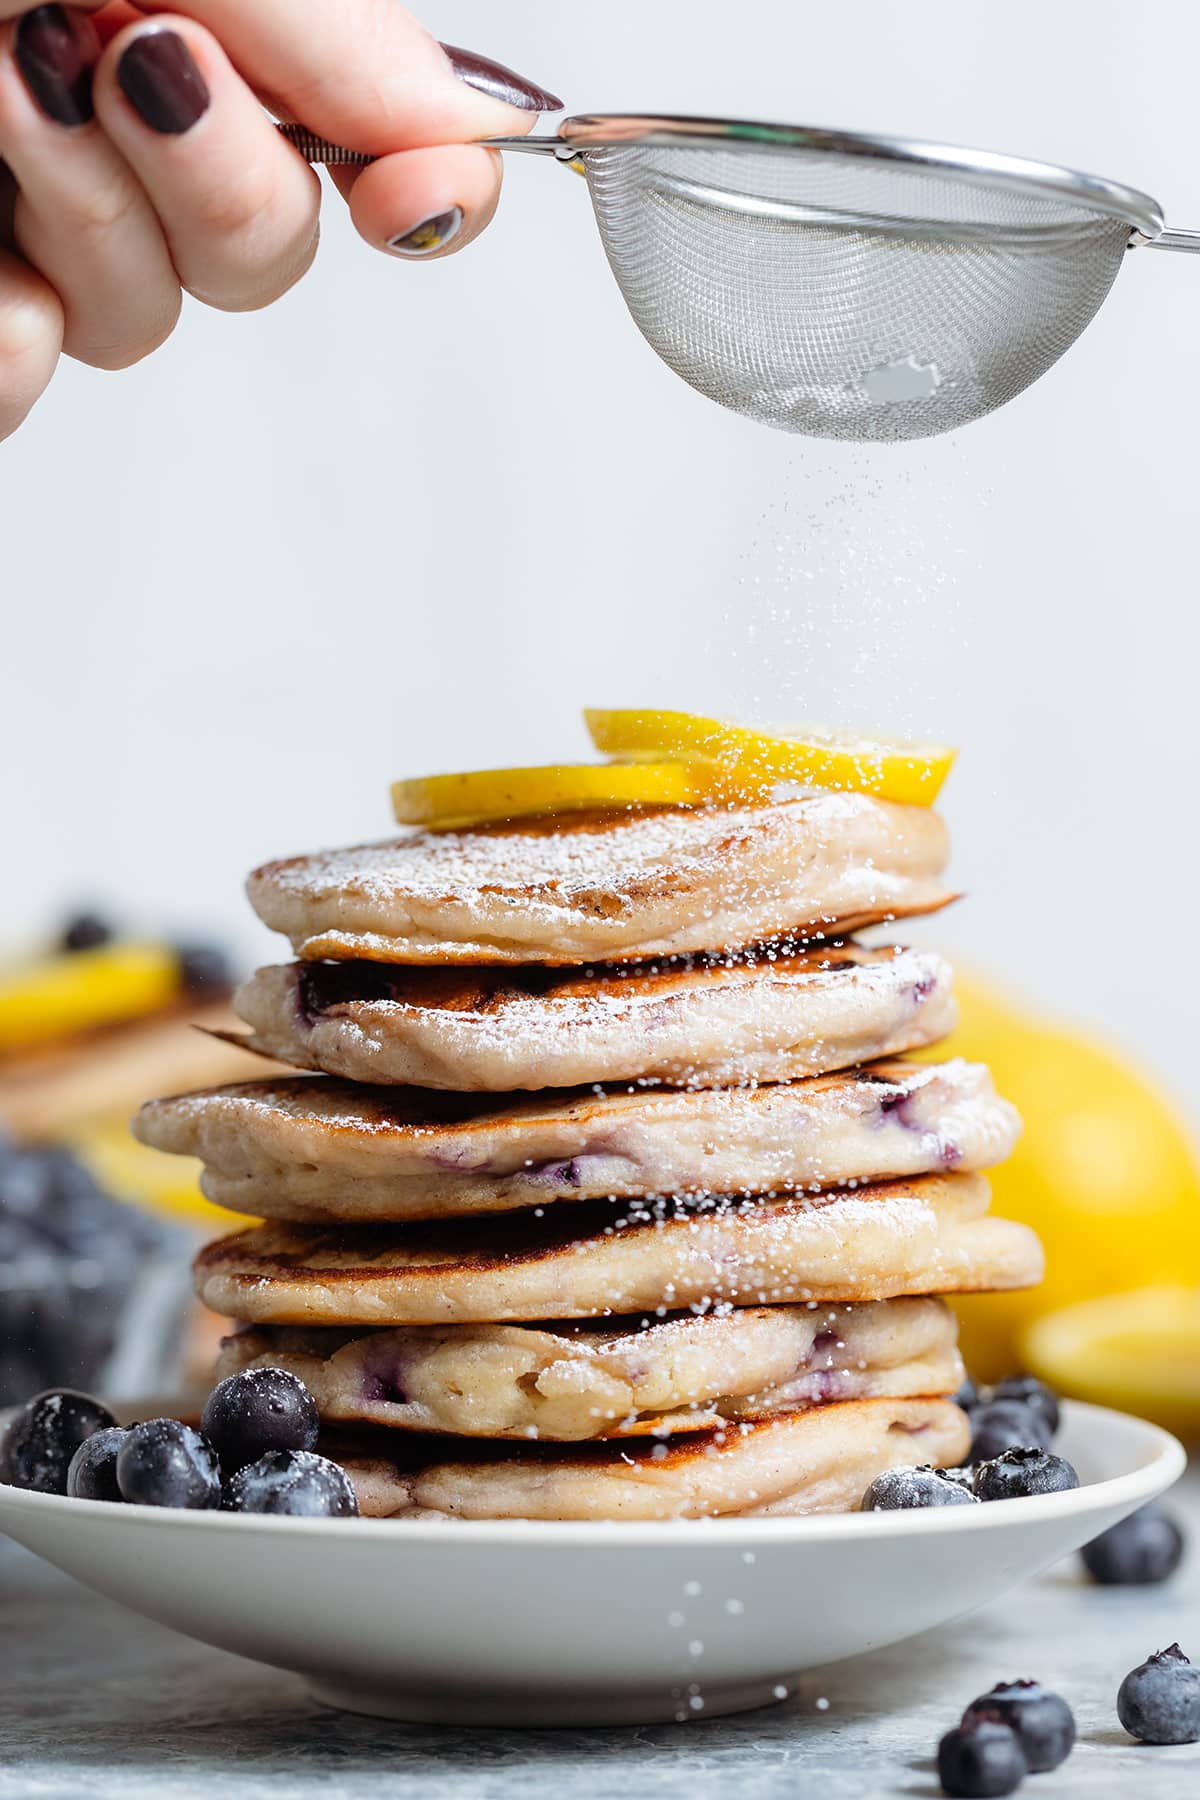 A stack of blueberry pancakes being dusted with powdered sugar.